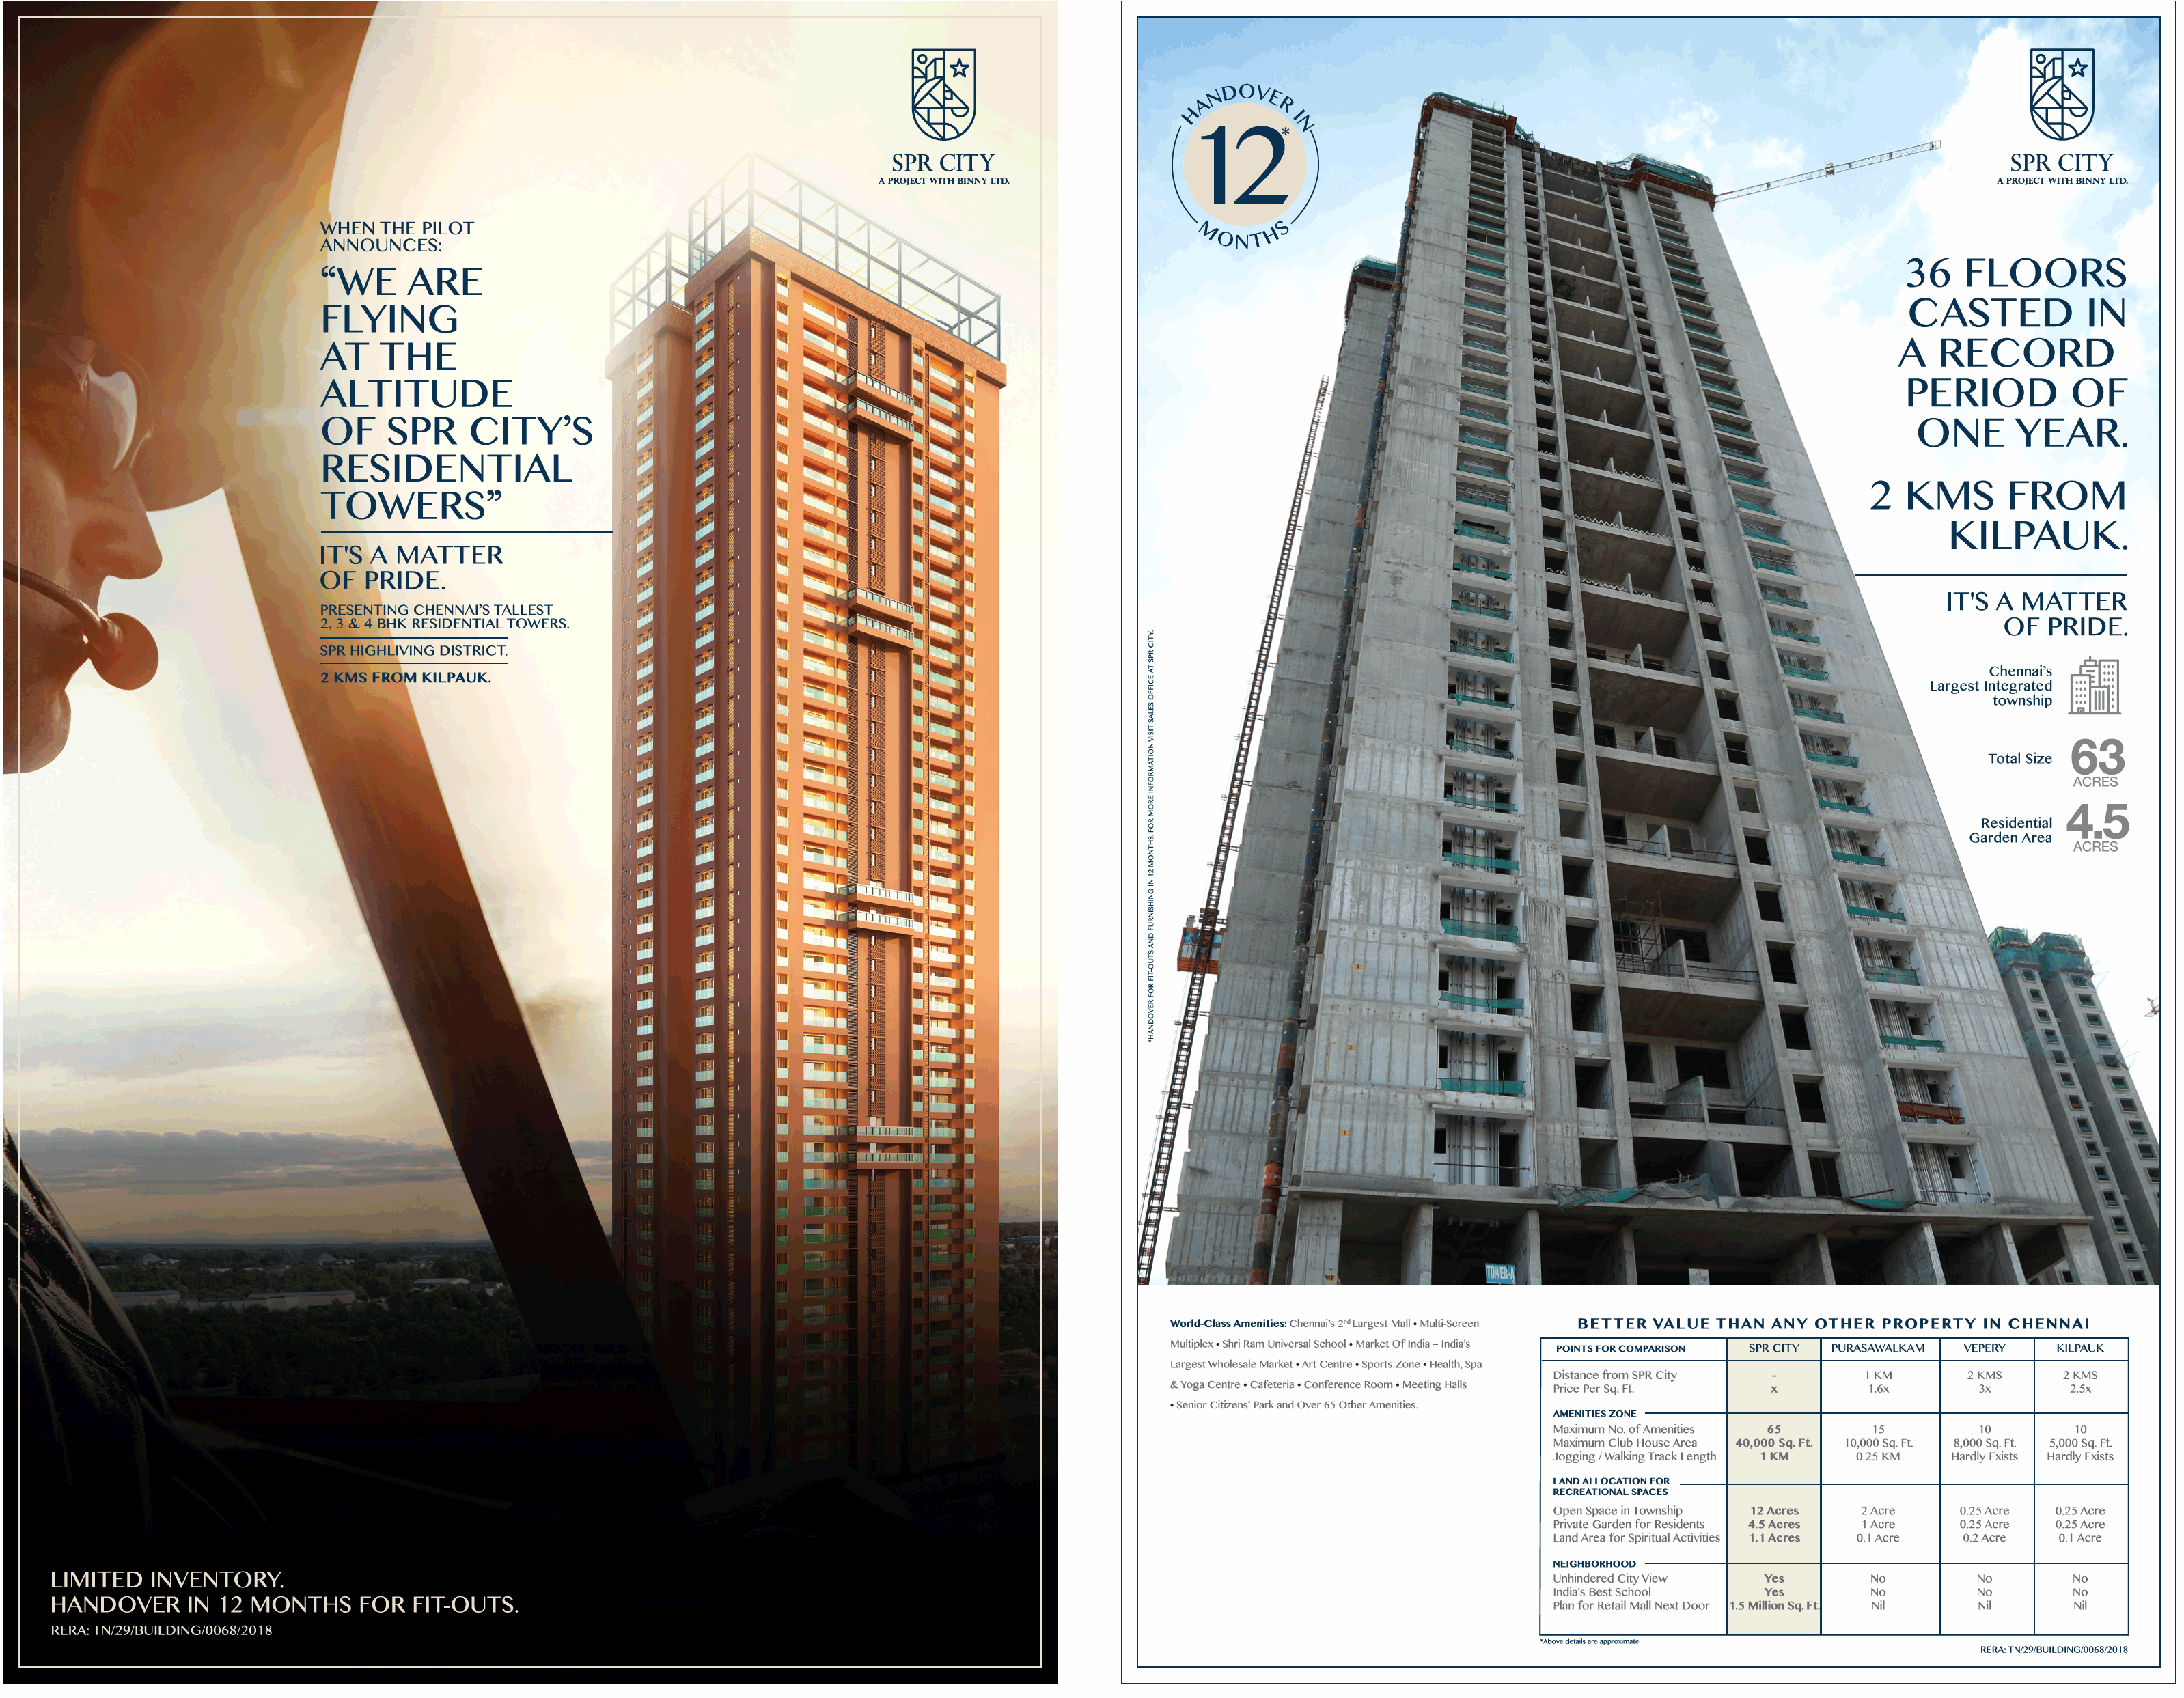 Presenting Chennai's Tallest 2, 3, 4 BHK Residential Towers at SPR City Highliving District